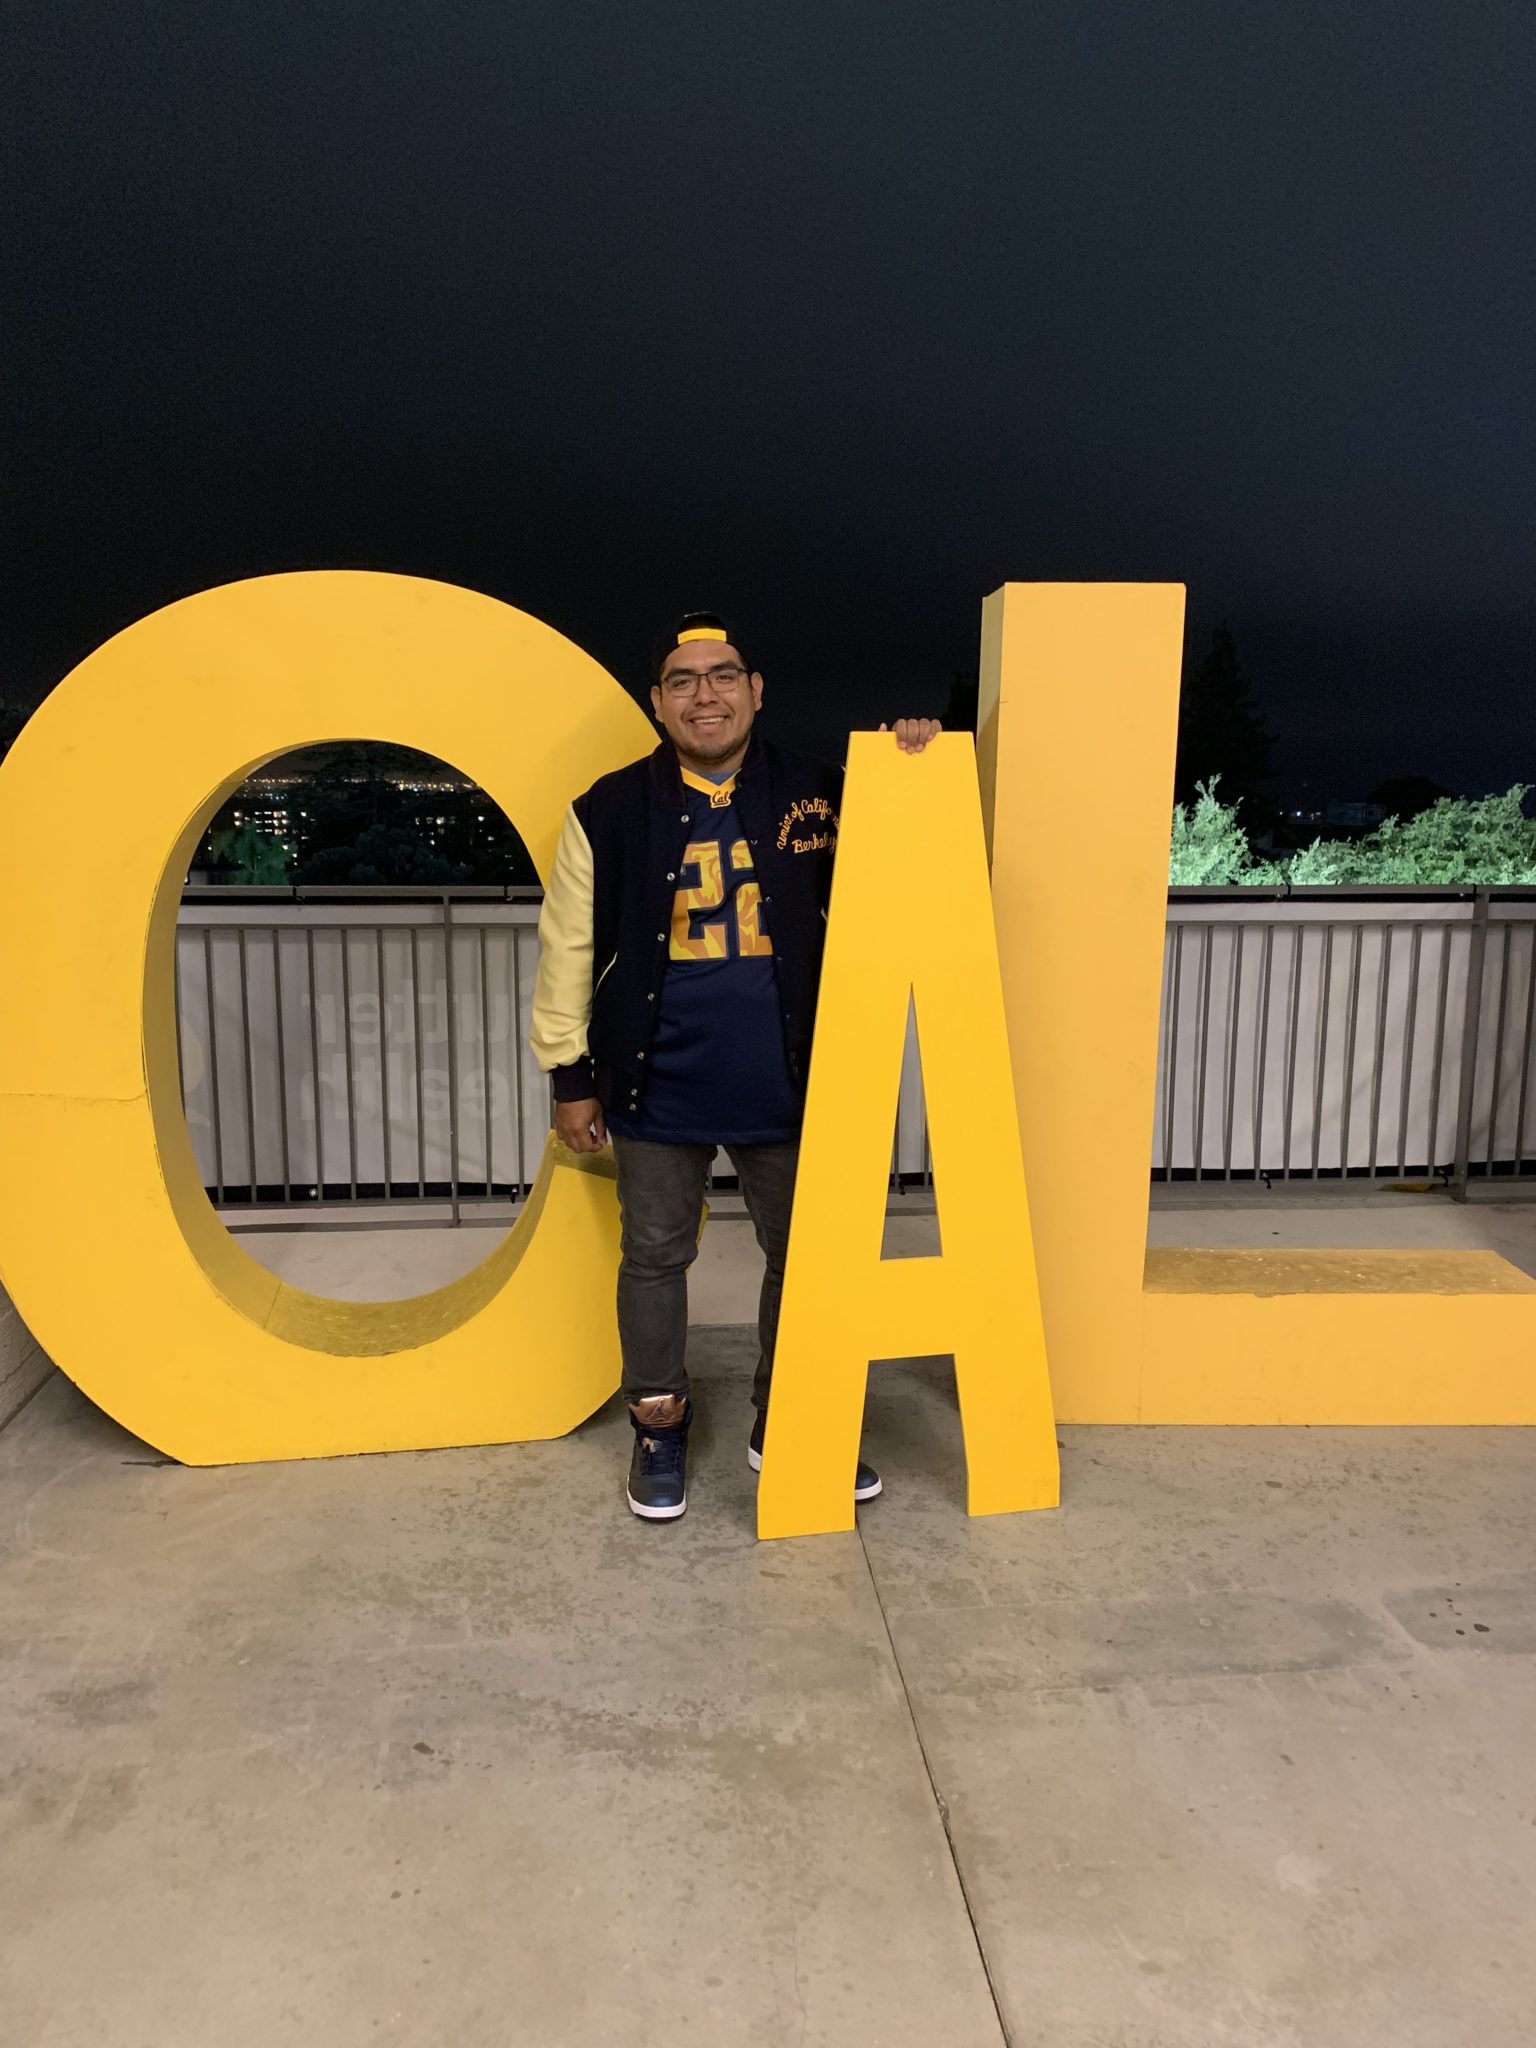 Cal student posing with giant letters that spell out "CAL"